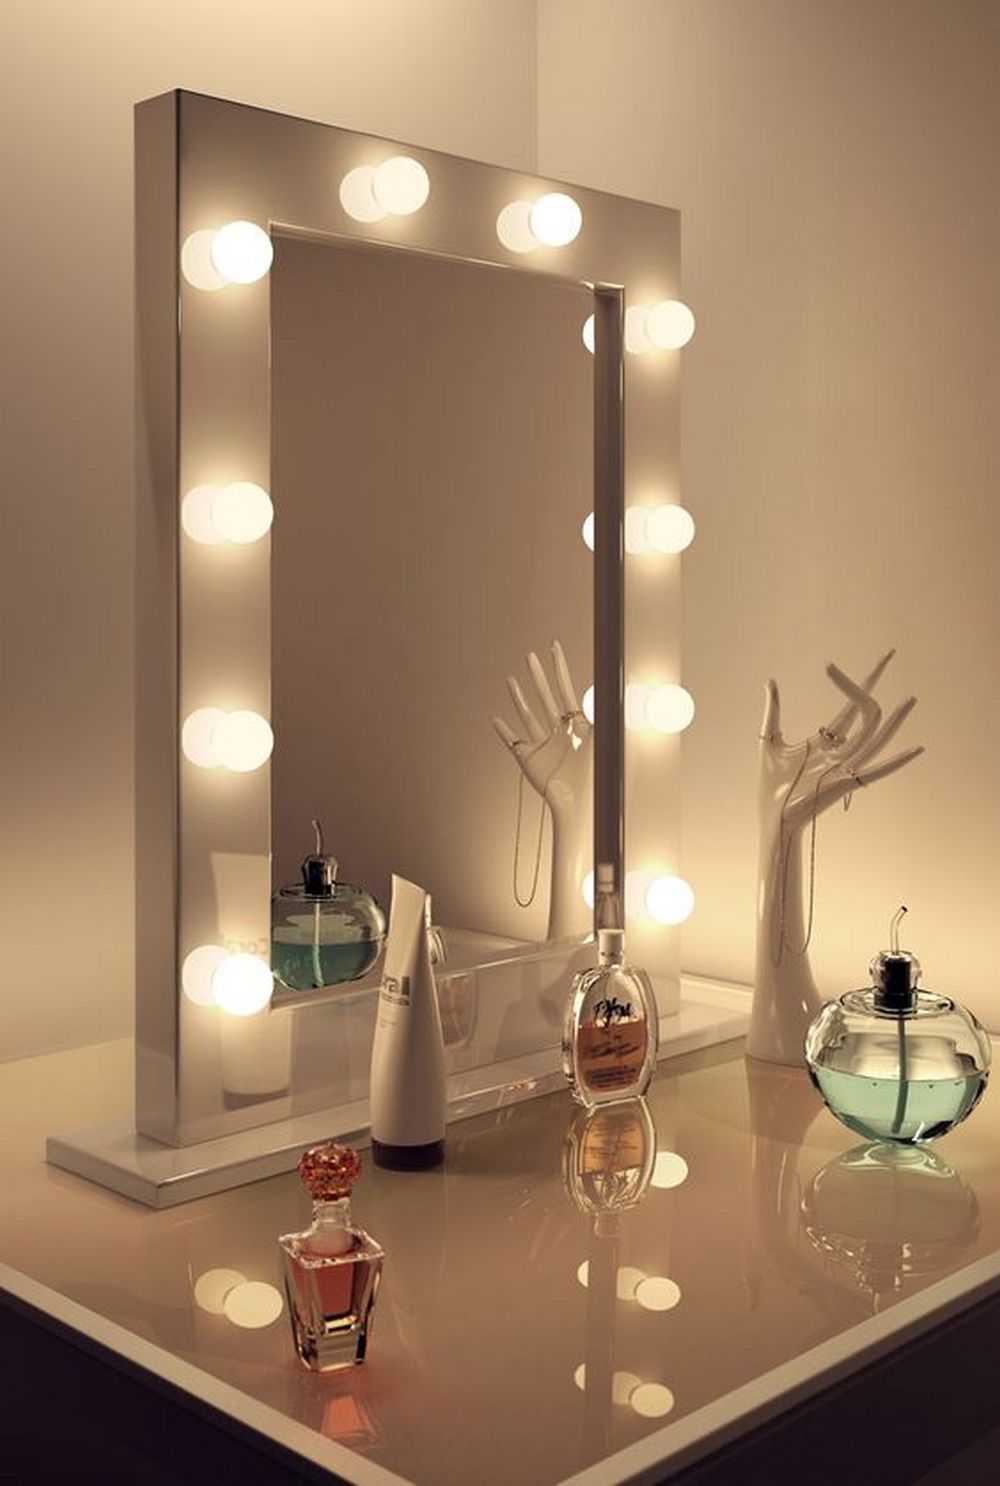 DIY Hollywood Lighted Vanity Mirror DIY projects for everyone!